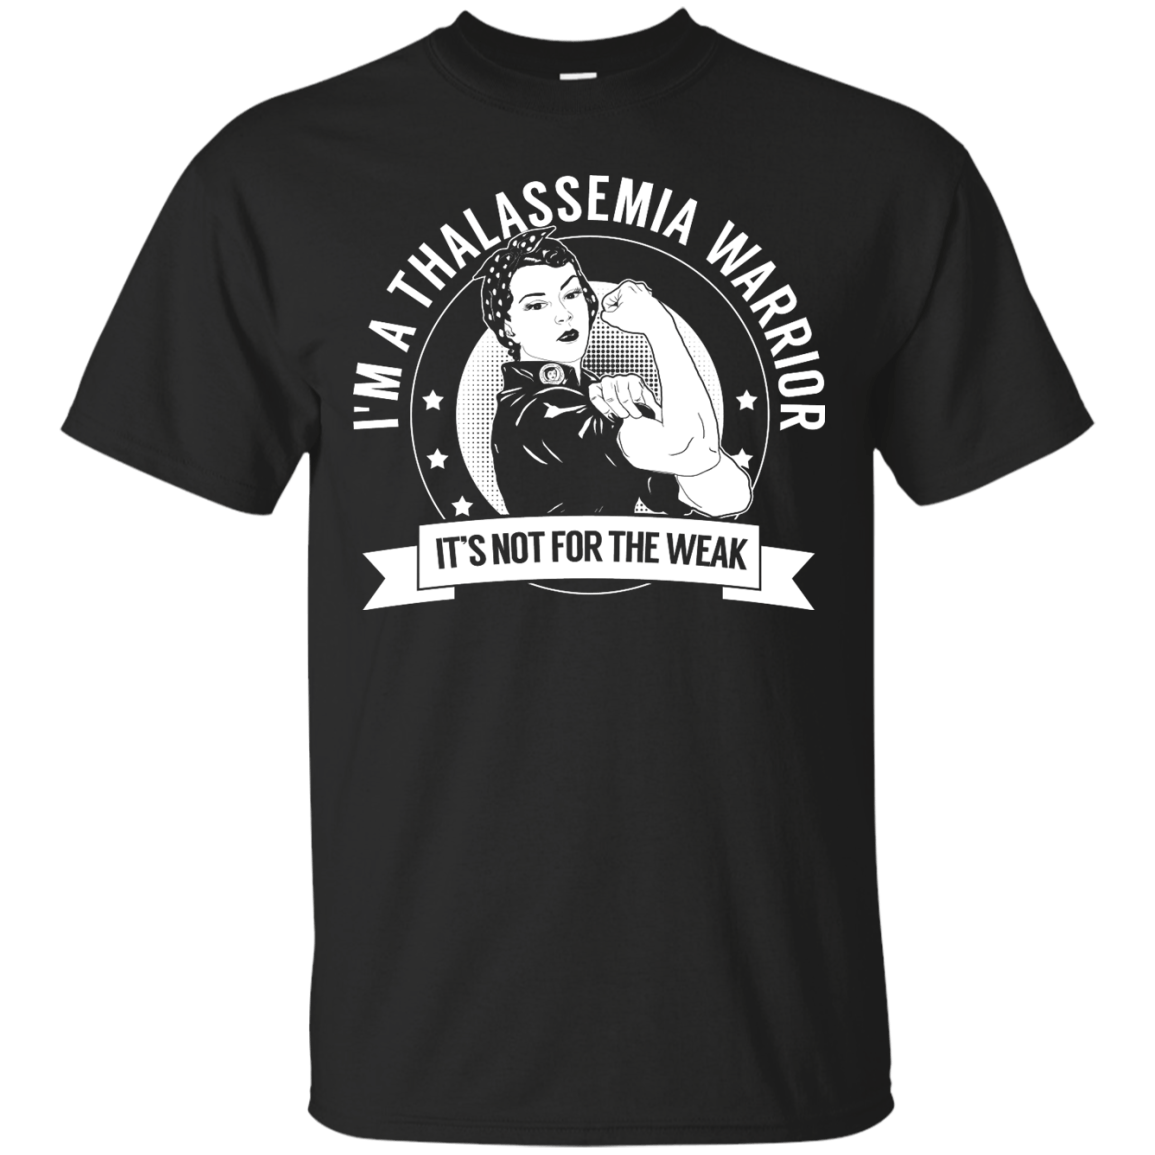 Thalassemia Warrior Not For The Weak Unisex Shirt - The Unchargeables